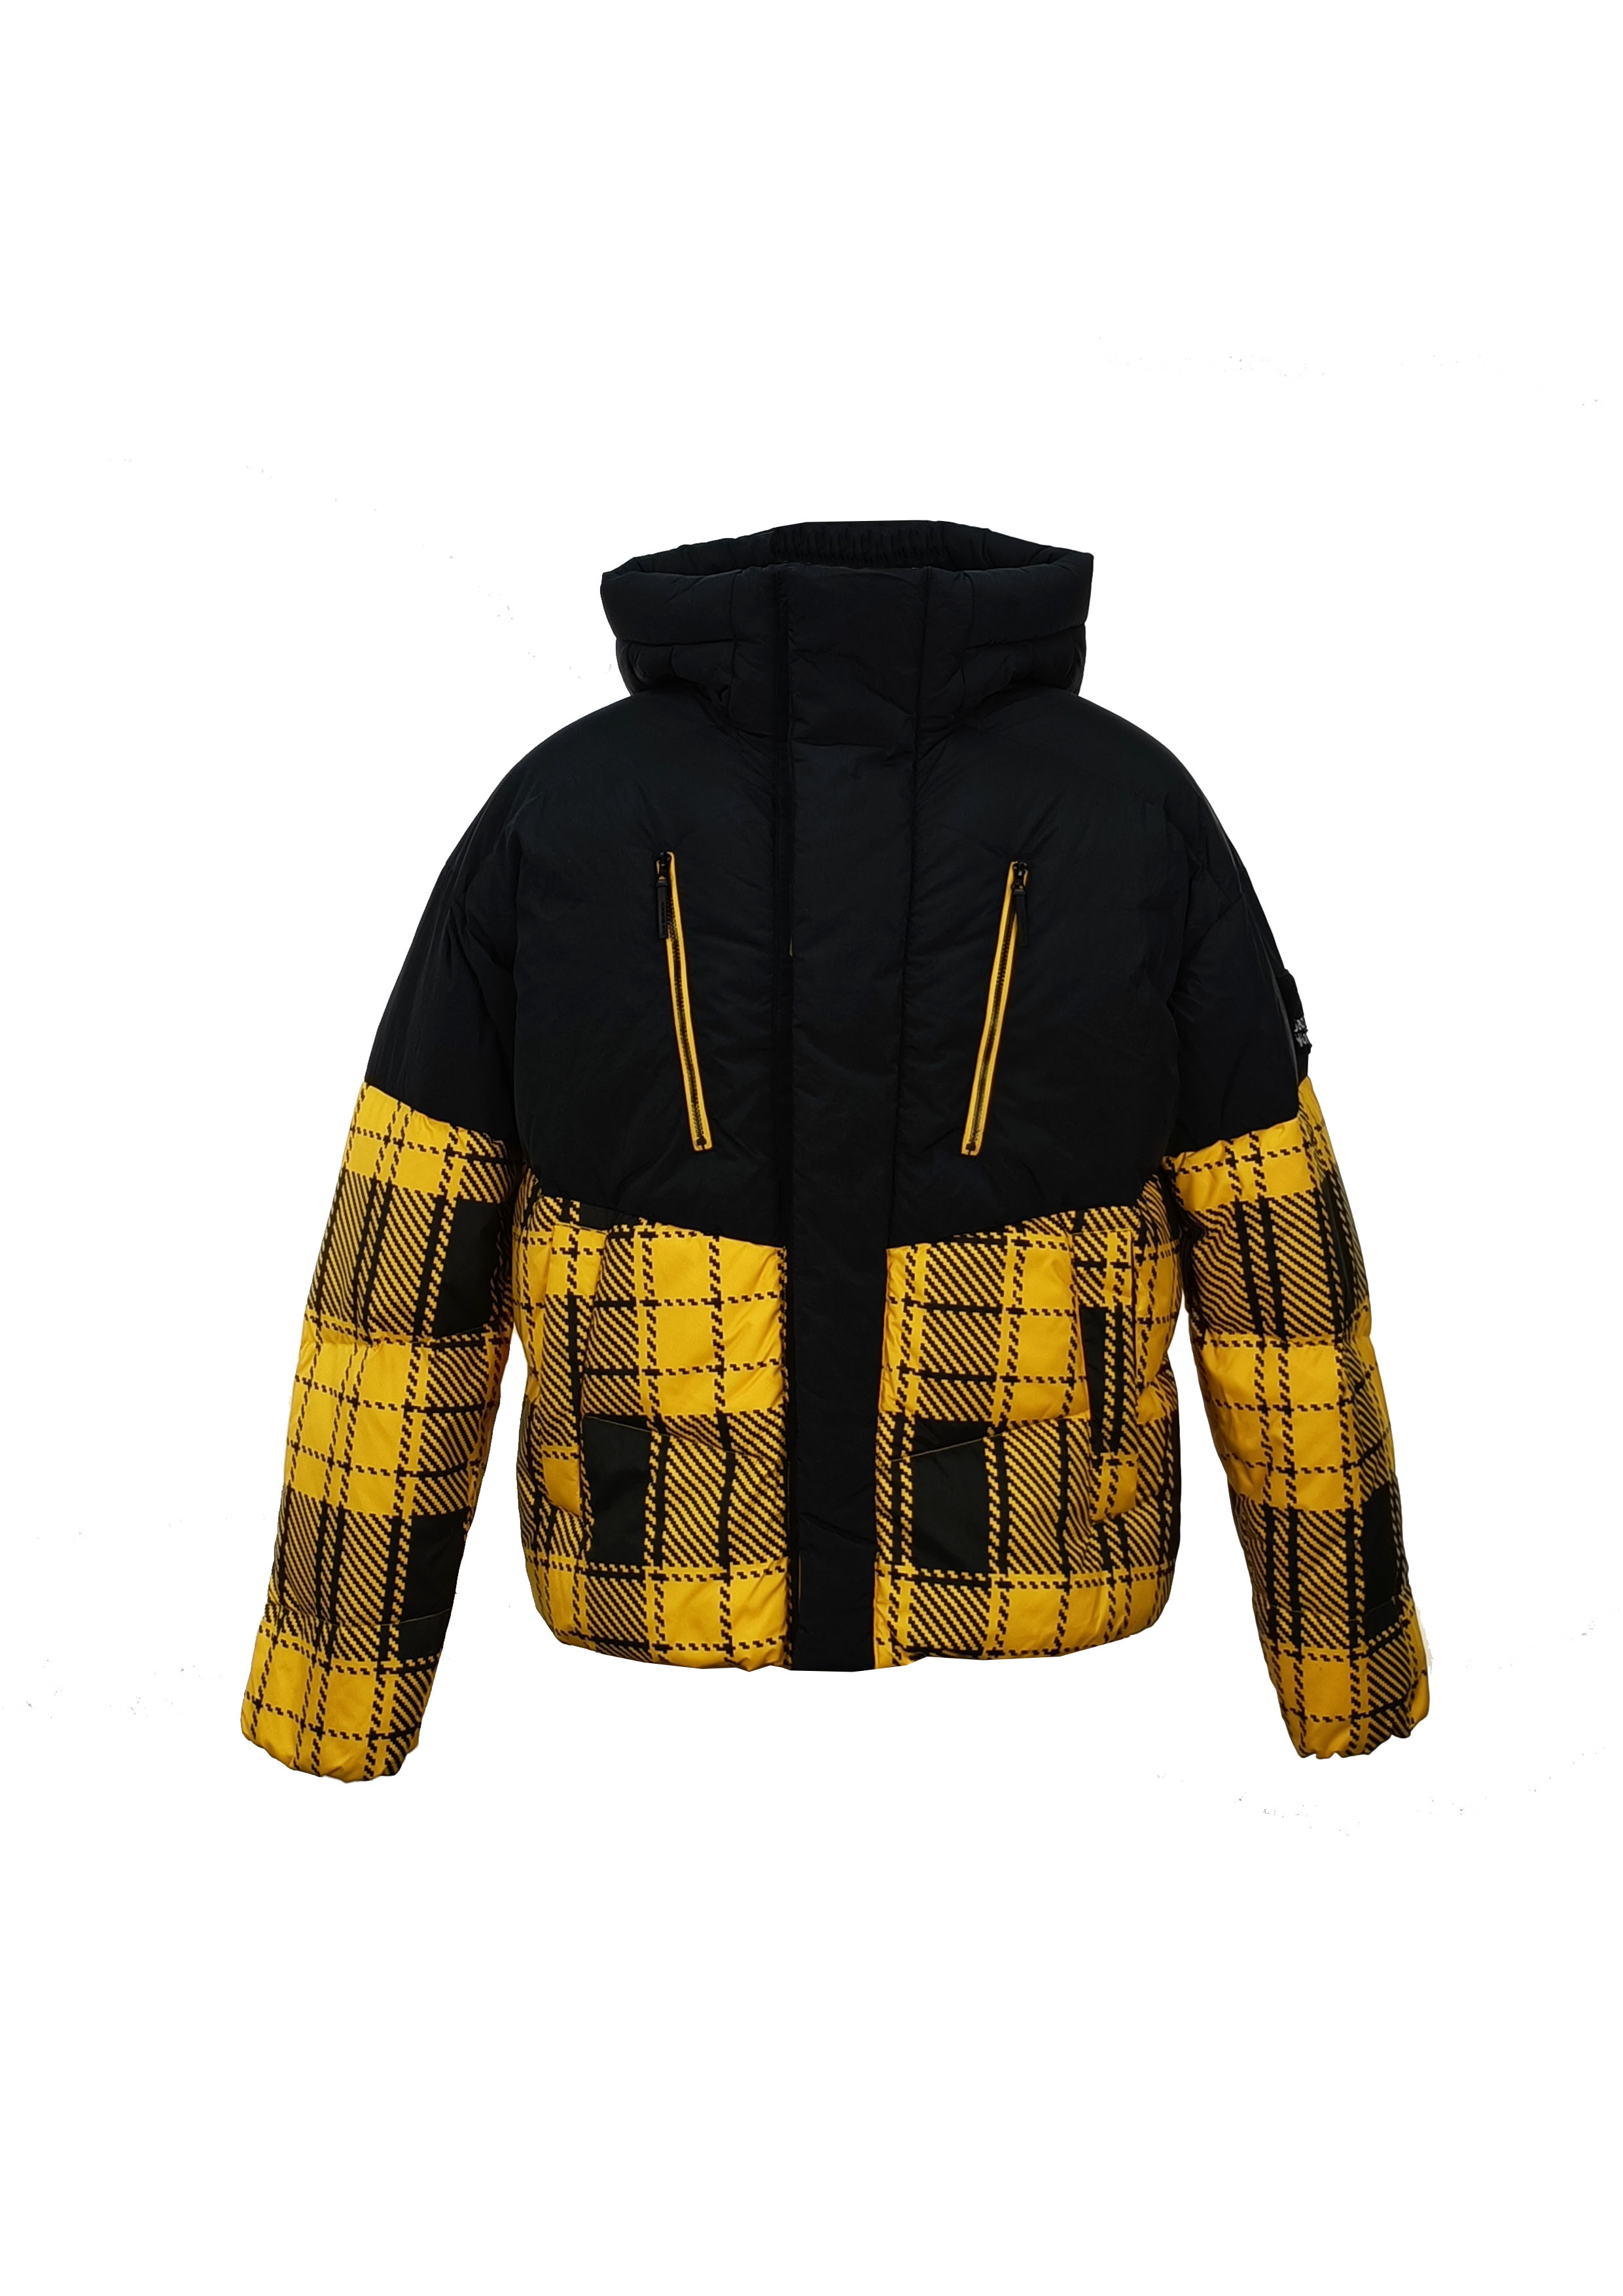 Men’s Down Puffer Jacket Featured Image